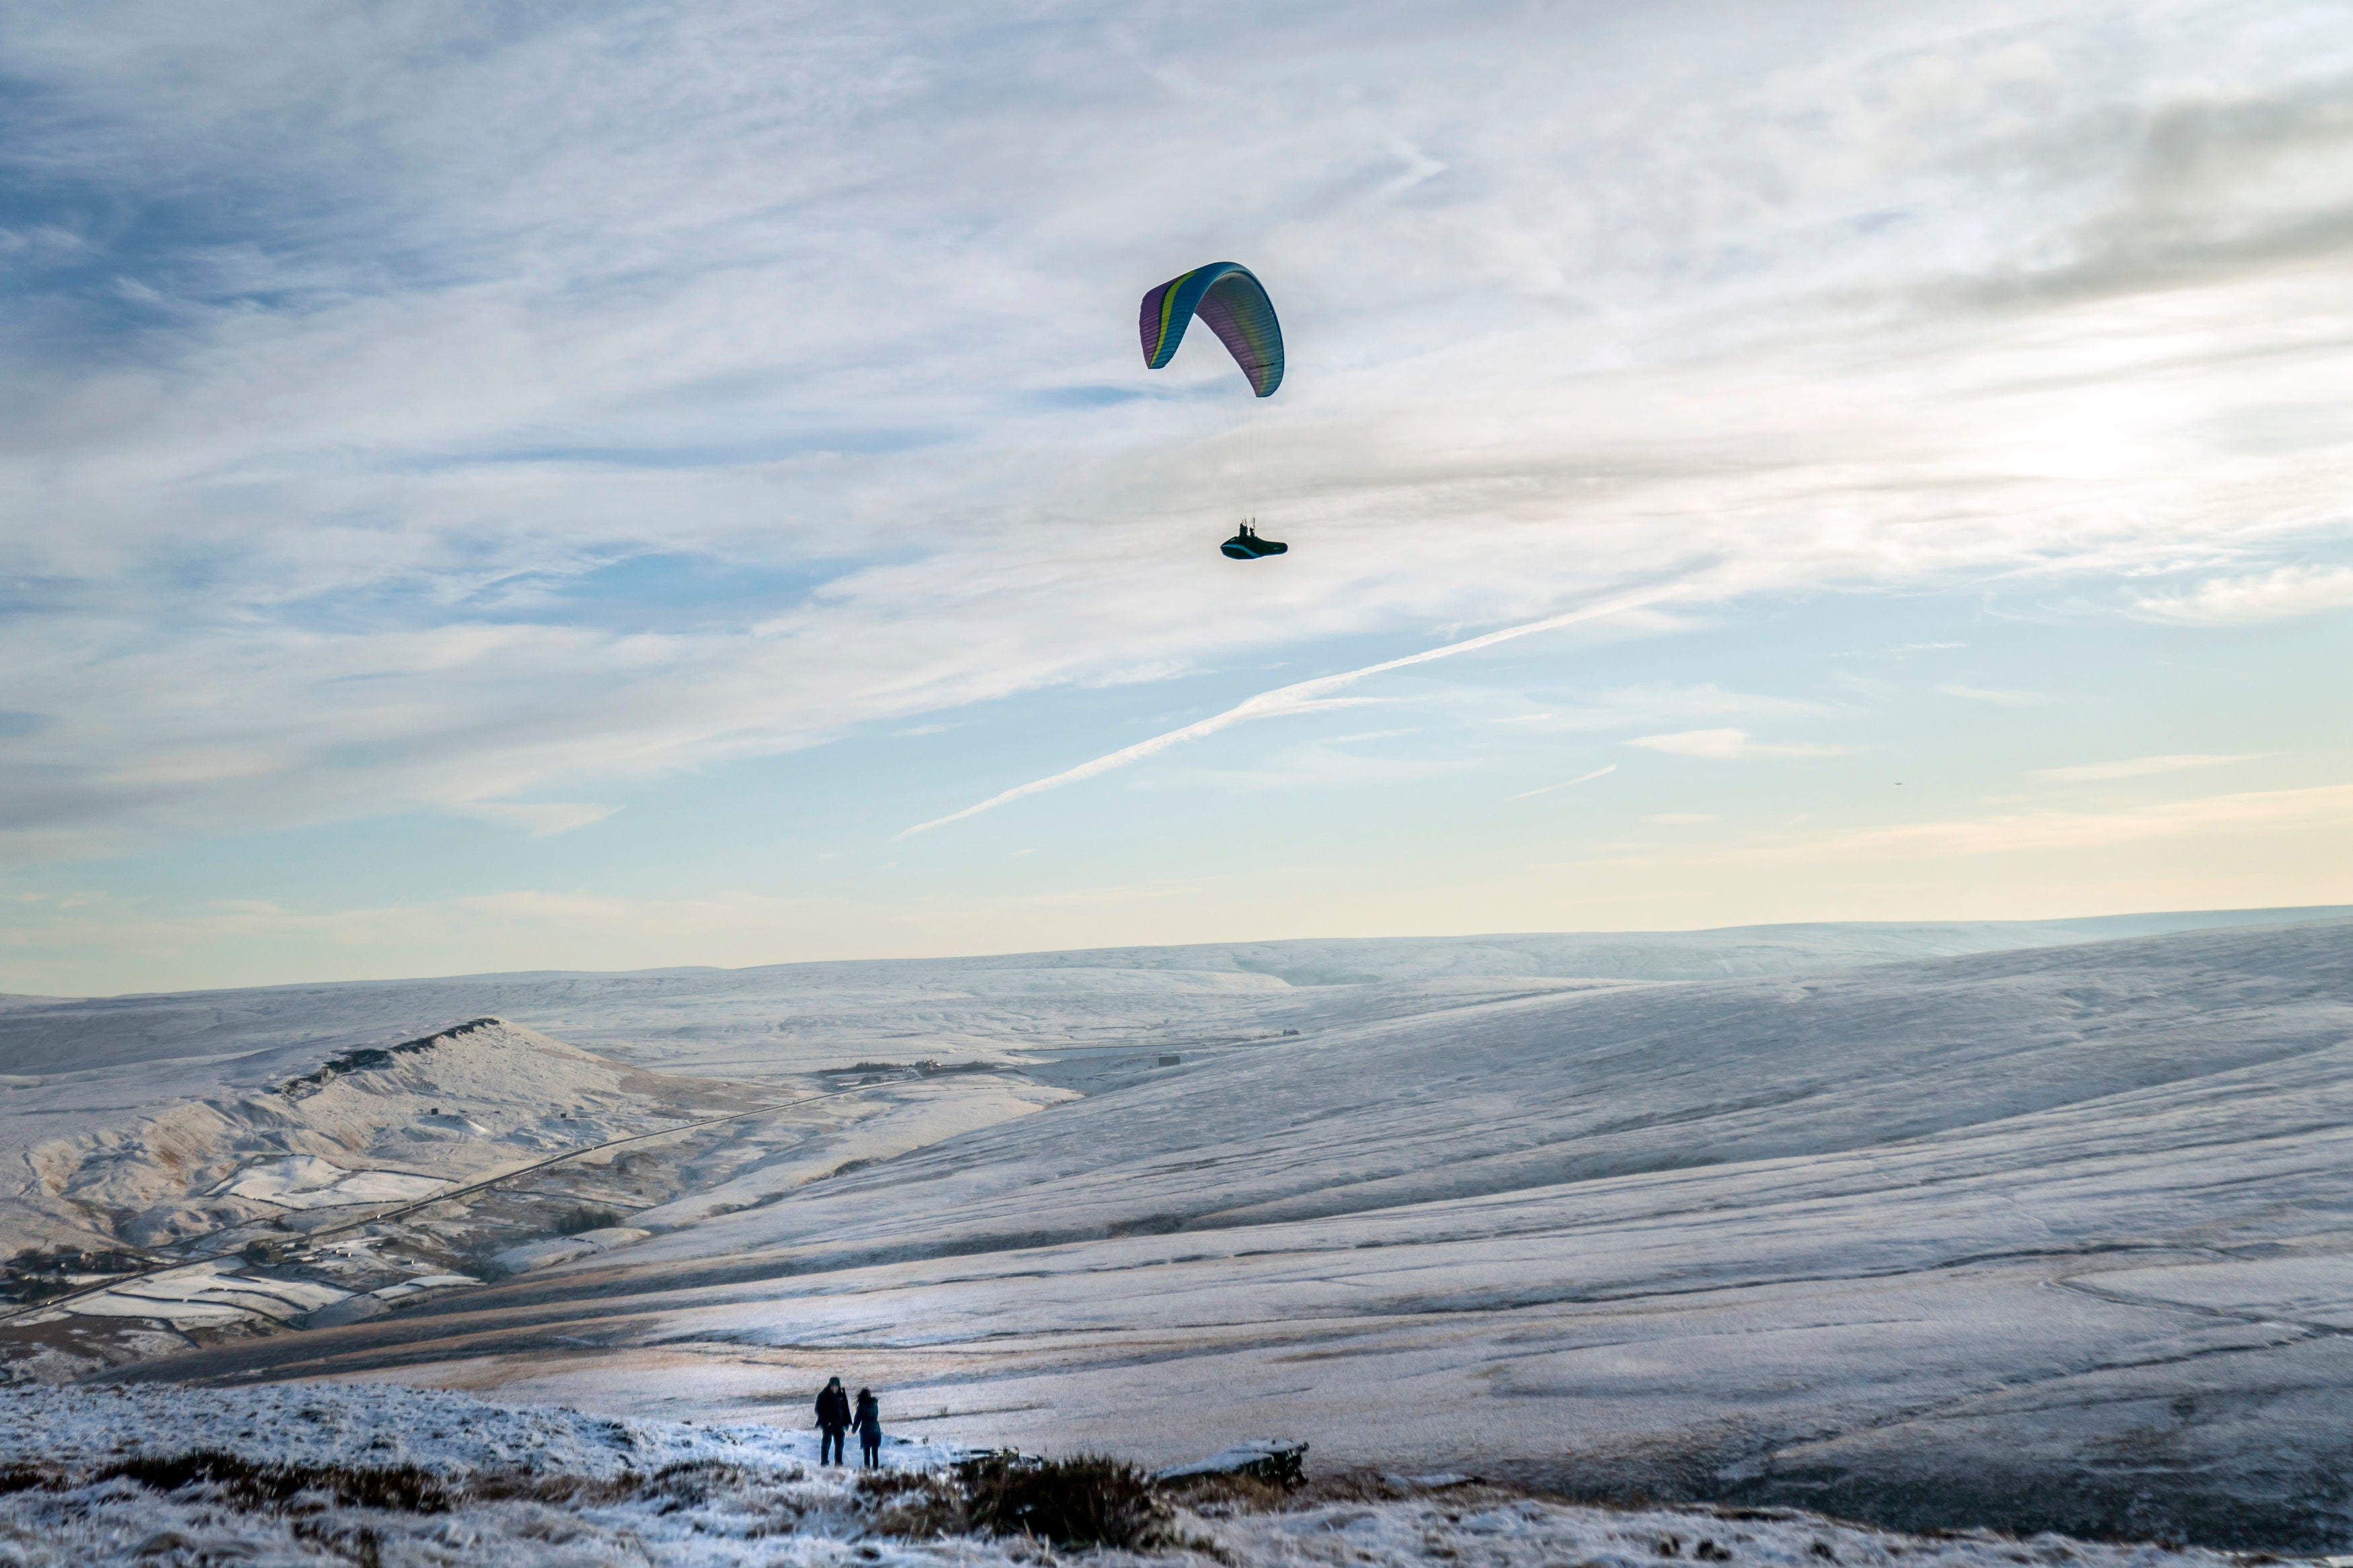 A paraglider over Marsden Moor in the South Pennines during wintry conditions in the UK last week